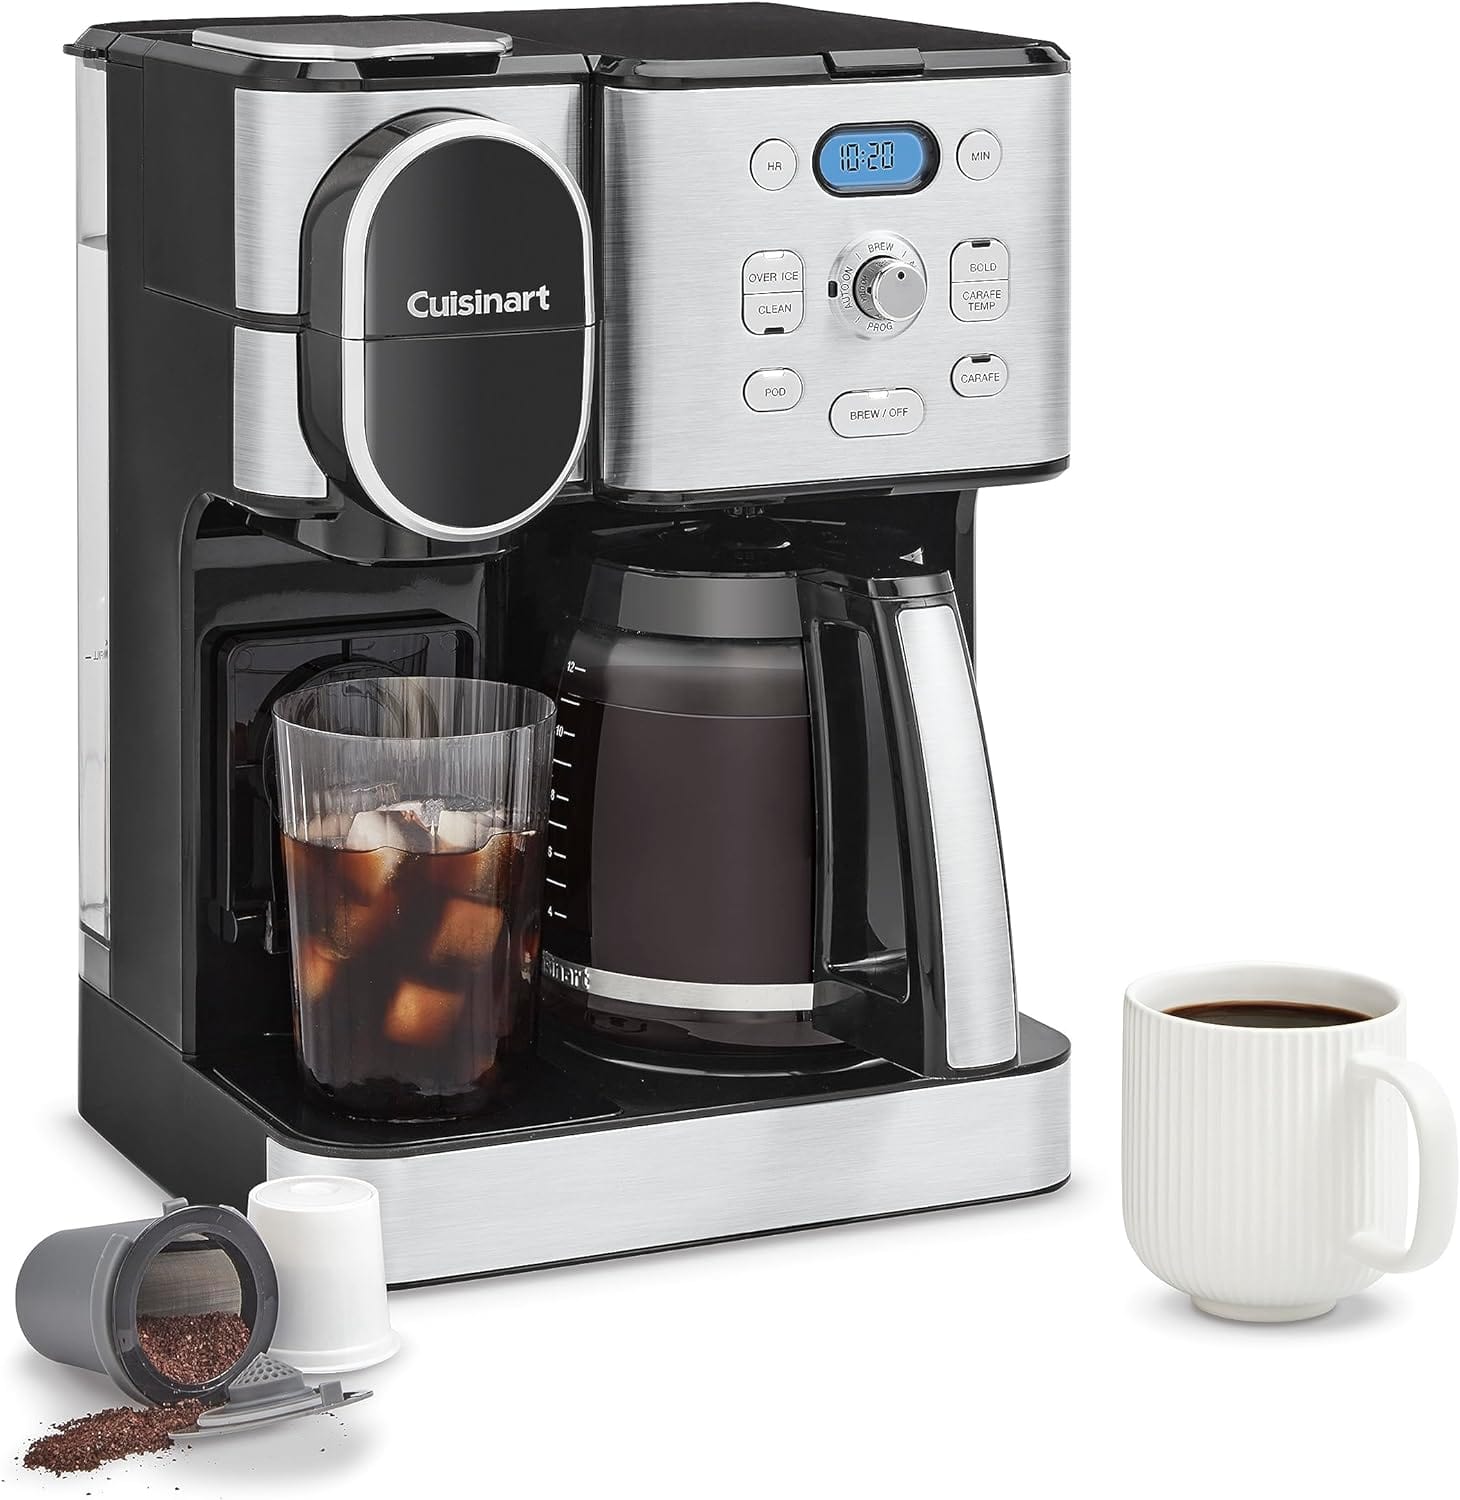 Cuisinart Electric Coffee Maker Cuisinart Coffee Center 12 Cup Coffeemaker And Single-Serve Brewer